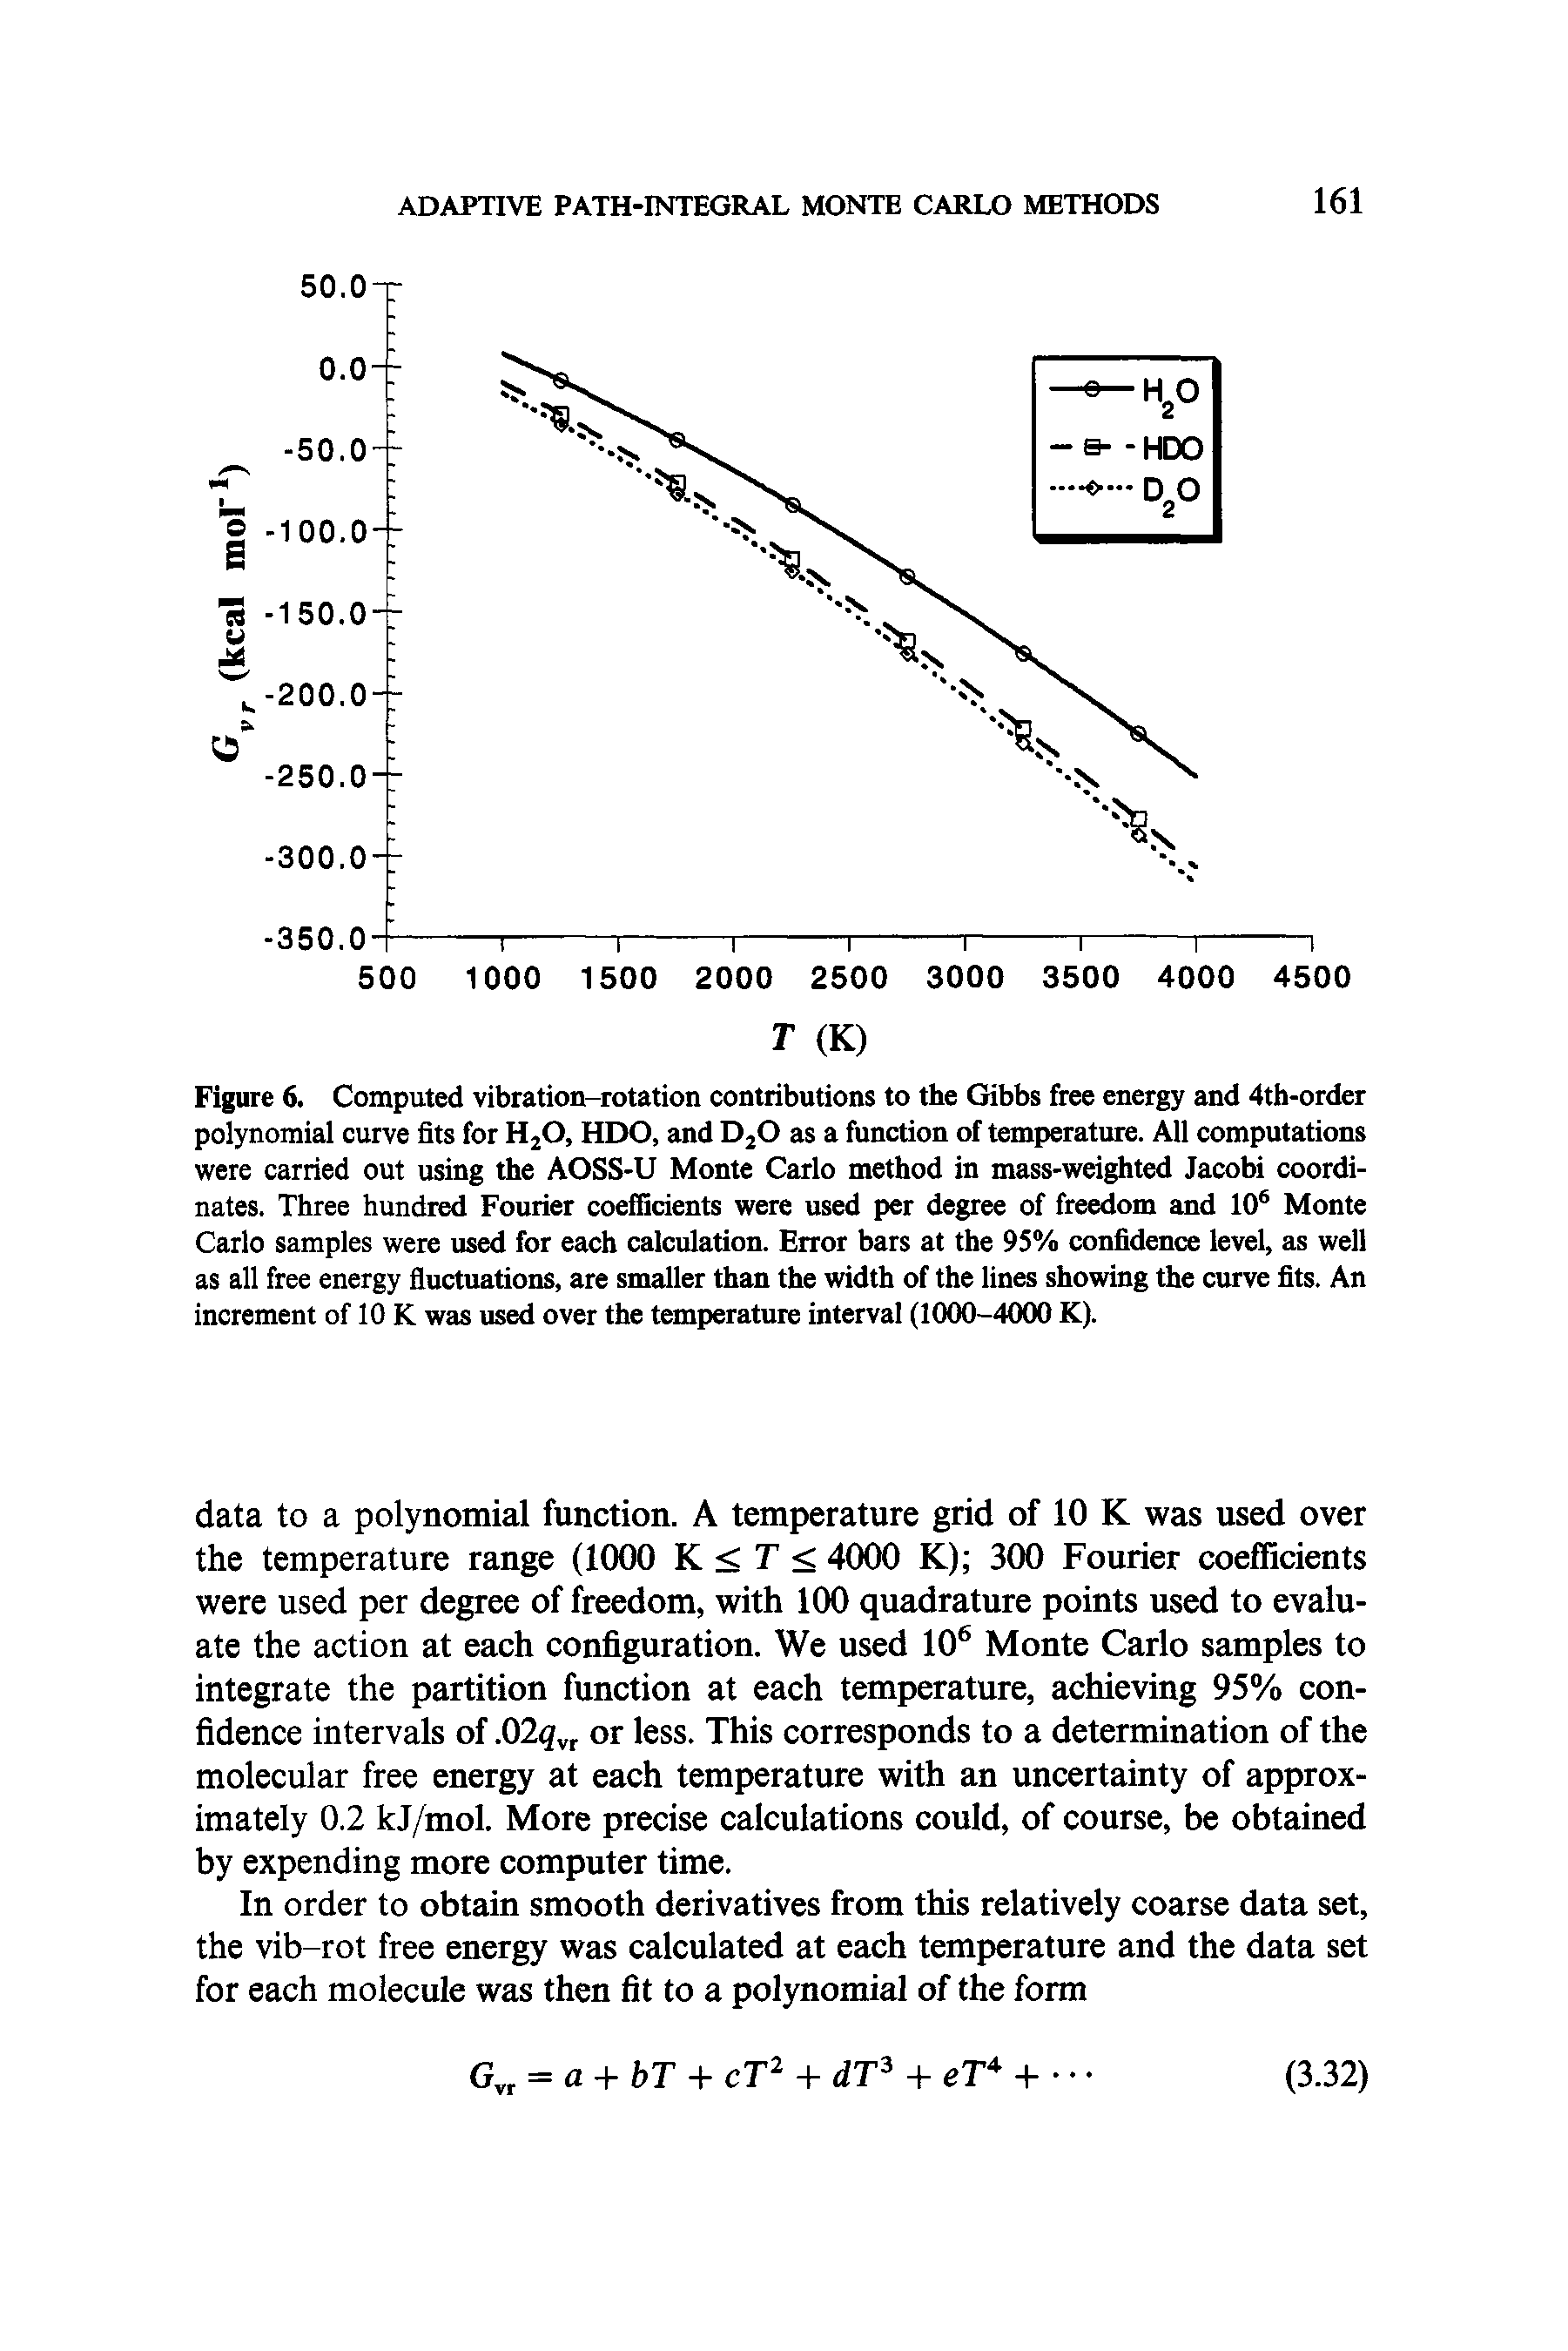 Figure 6. Computed vibration-rotation contributions to the Gibbs free energy and 4th-order polynomial curve fits for H20, HDO, and D20 as a function of temperature. AH computations were carried out using the AOSS-U Monte Carlo method in mass-weighted Jacobi coordinates. Three hundred Fourier coefficients were used per degree of freedom and 106 Monte Carlo samples were used for each calculation. Error bars at the 95% confidence level, as weU as all free energy fluctuations, are smaller than the width of the lines showing the curve fits. An increment of 10 was used over the temperature interval (1000-4000 K).